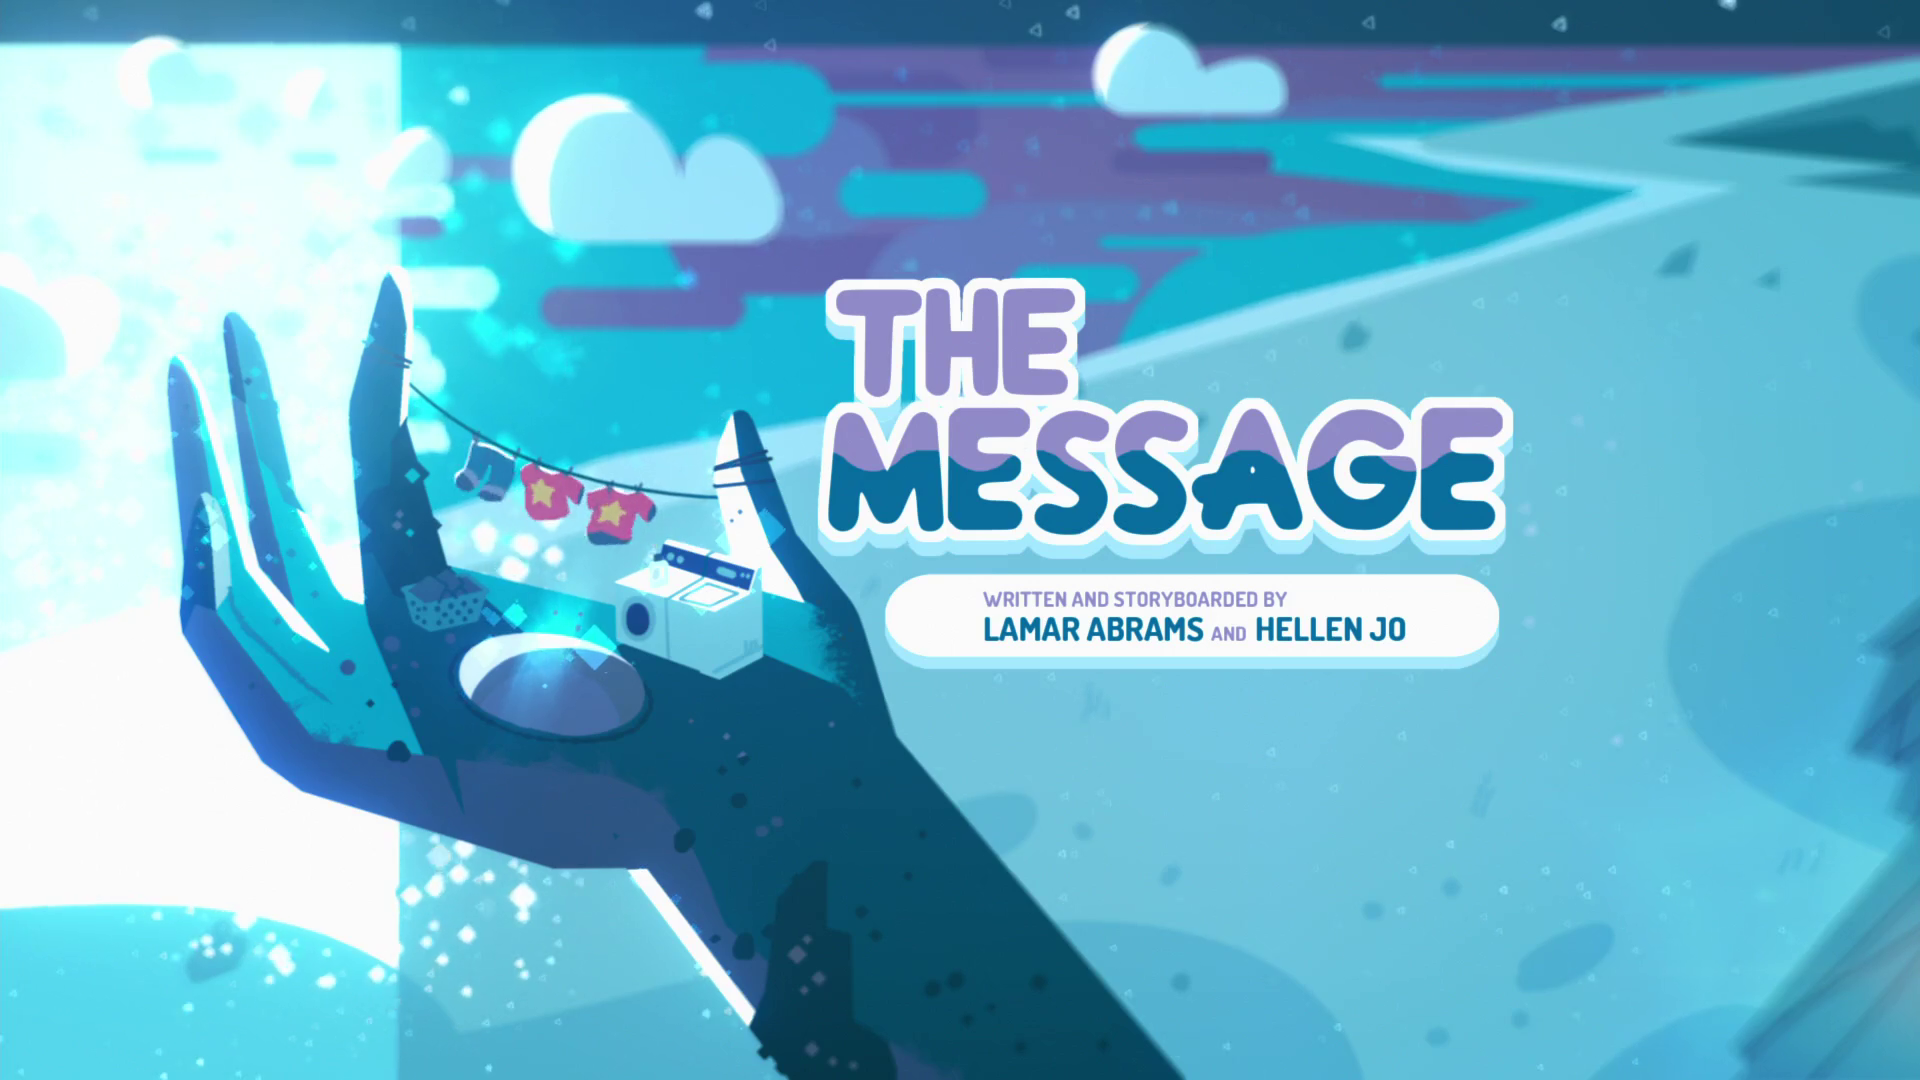 Steven Universe' and the Hidden Messages in Built Environments